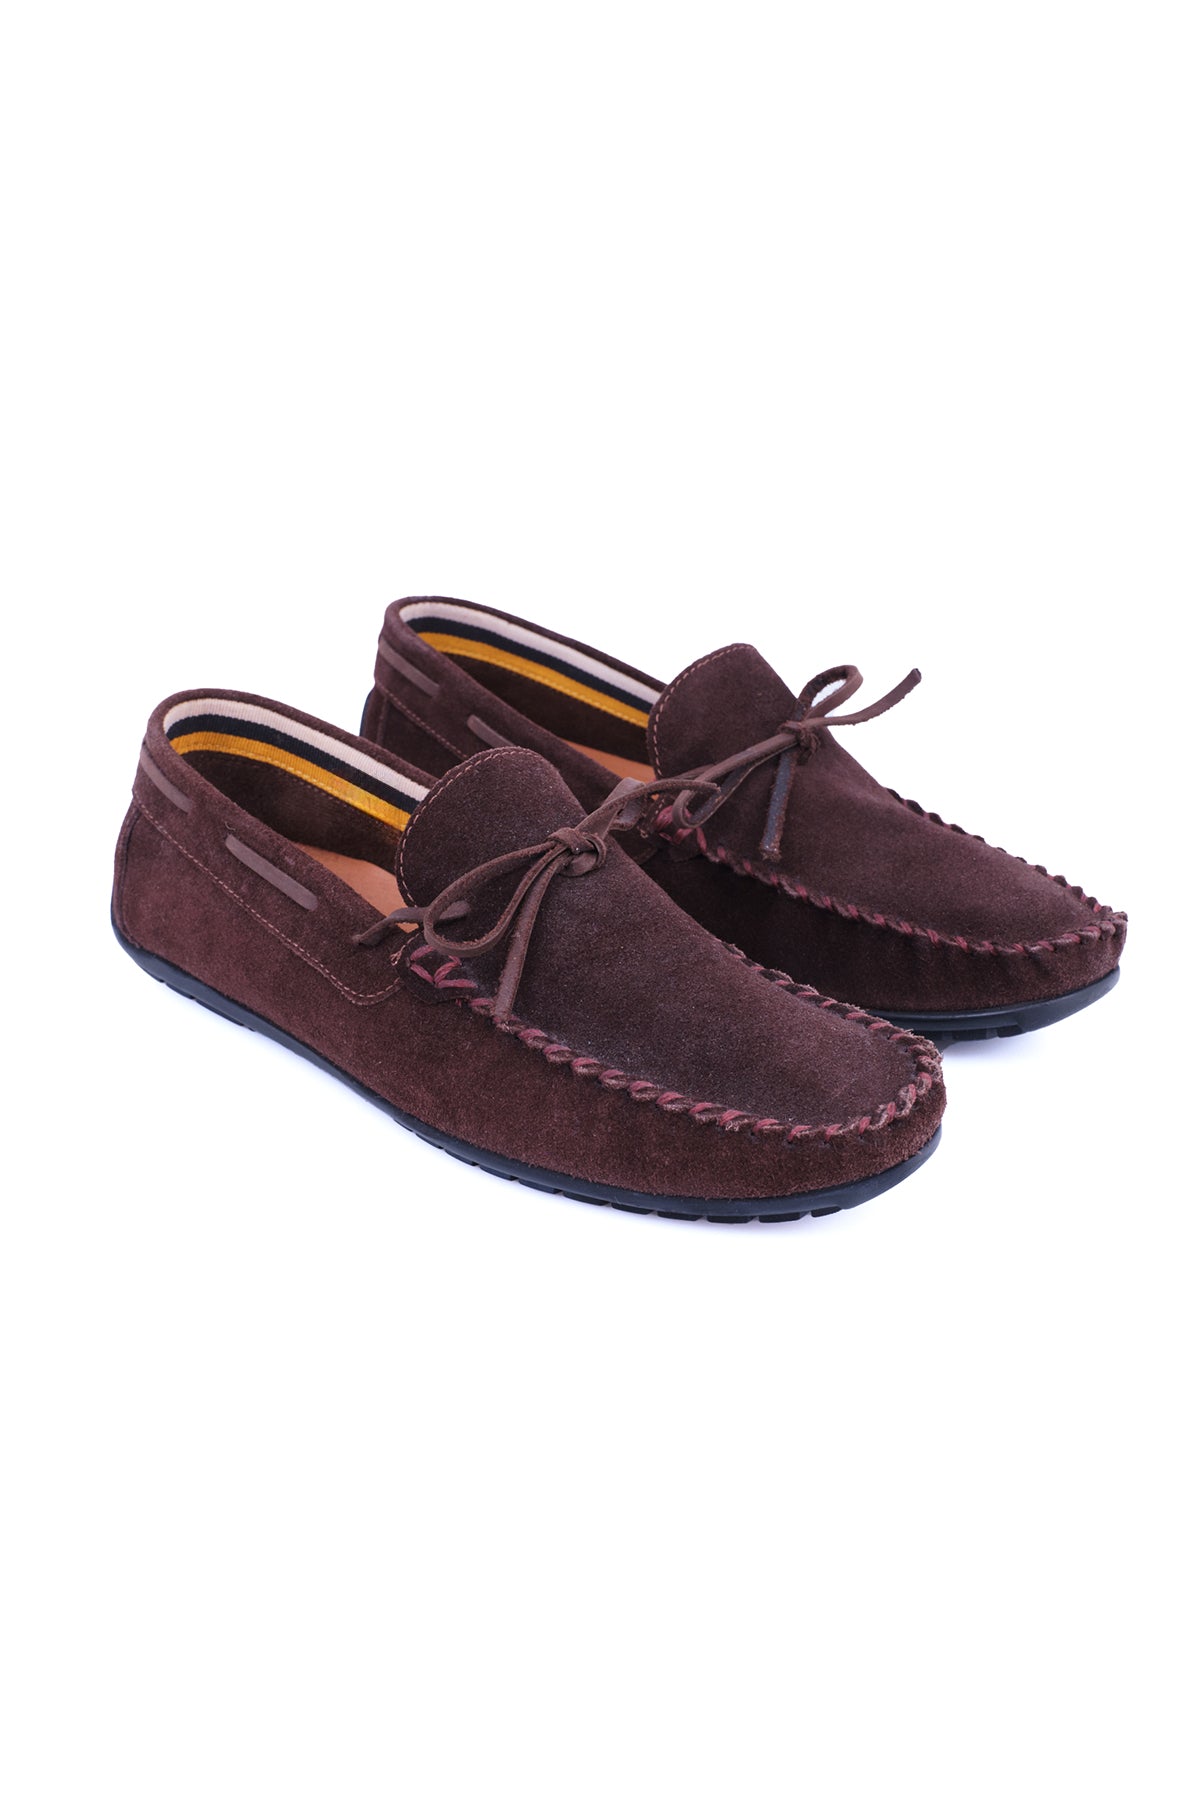 SUEDE CAR LOAFERS ΚΑΦΕ.